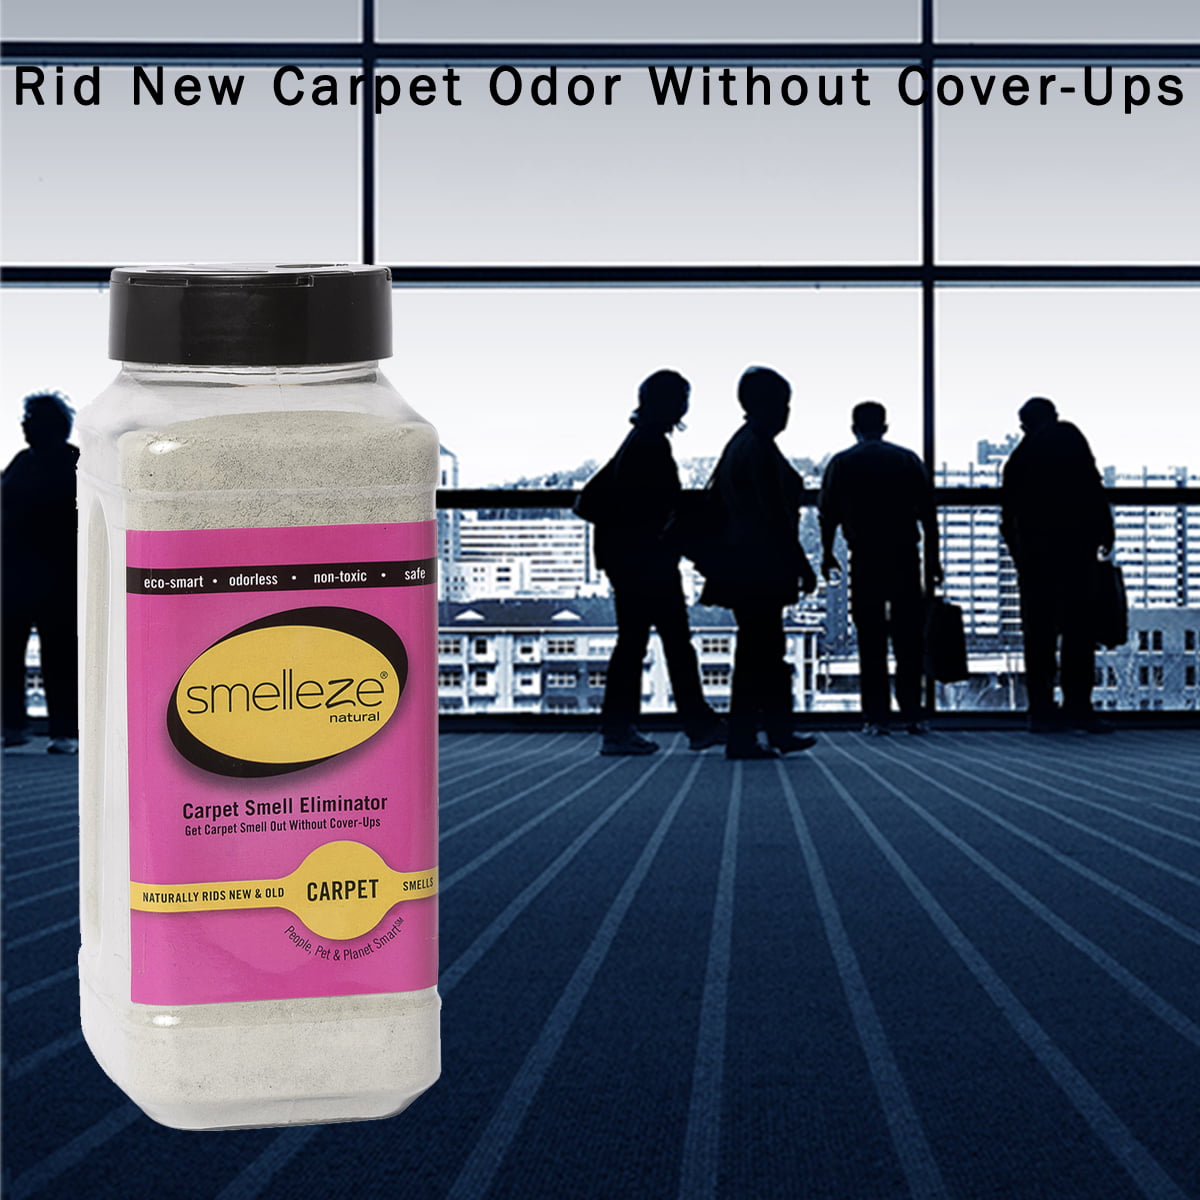 Carpet Deodorizers Natural Odor Removal 2 Lb Powder Removes Stench Fast Home " 